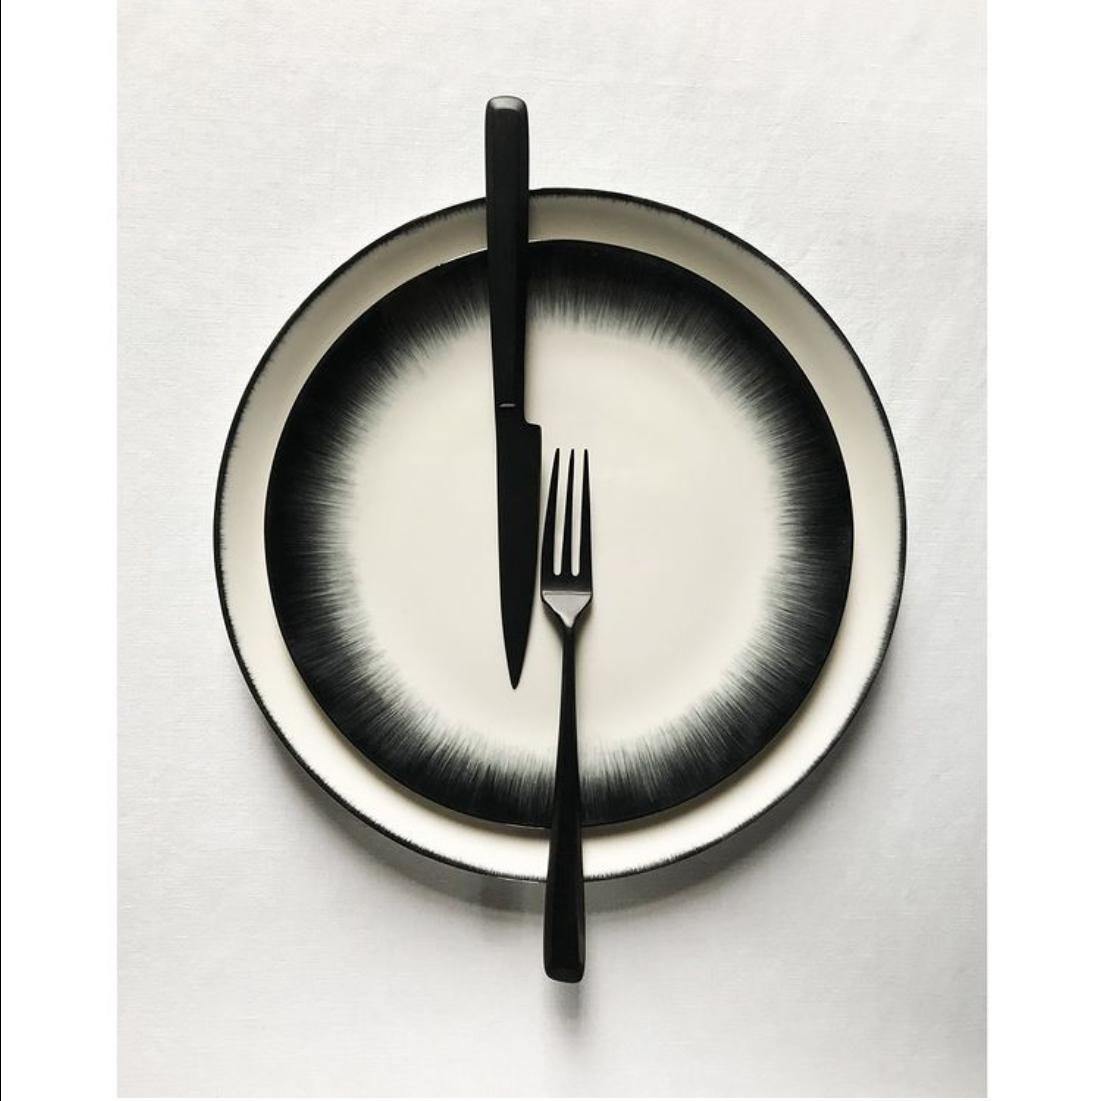 Black Ann Demeulemeester for Serax 15.5 cm High Plates (set of two) For Sale